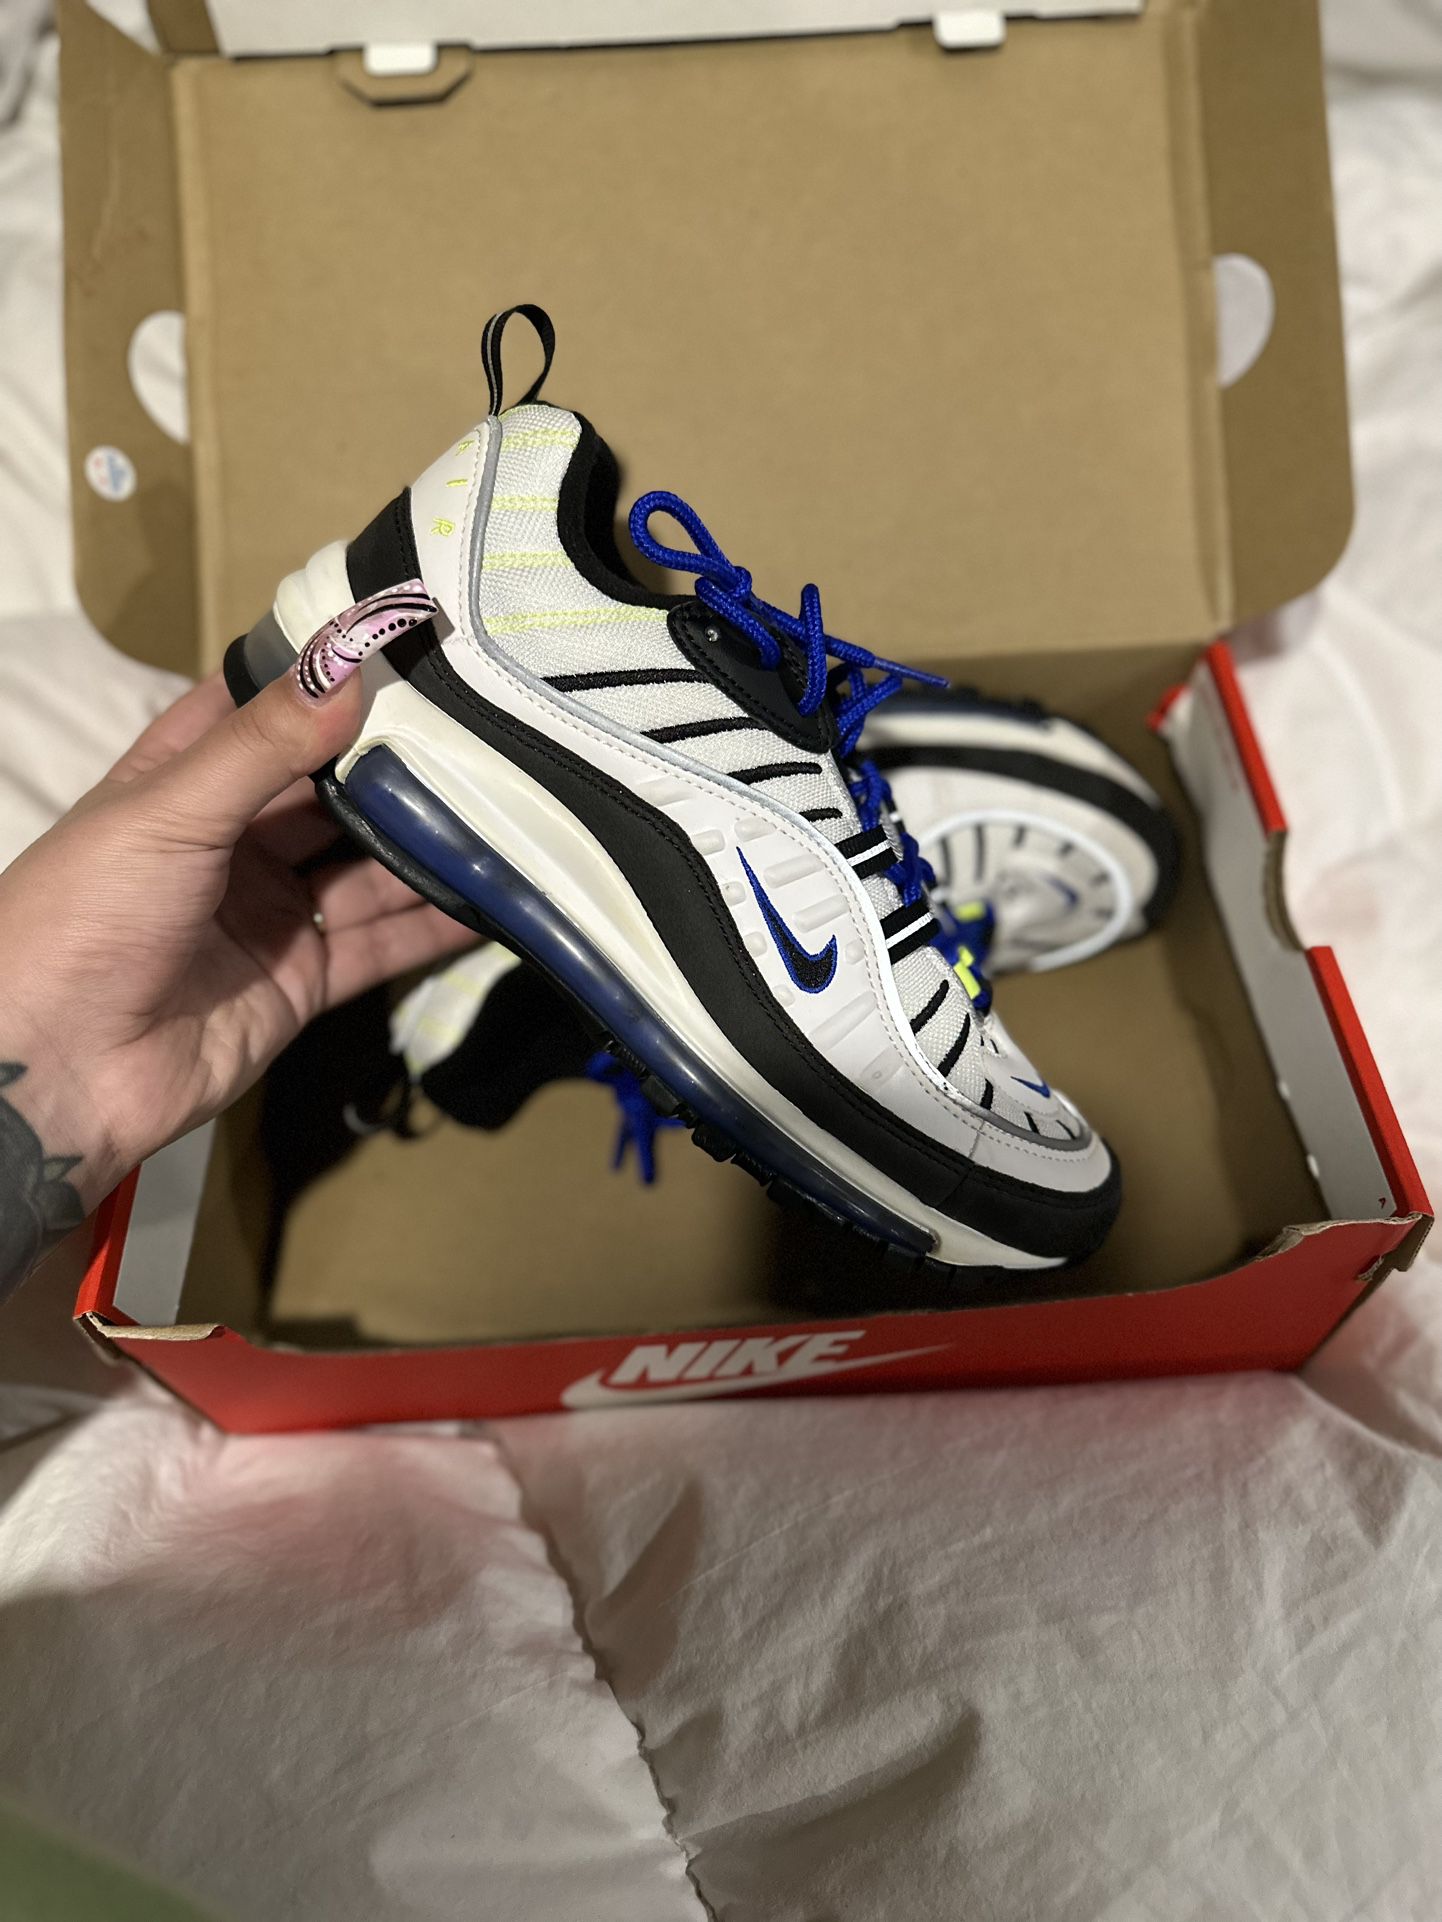 Nike Max 98 White Black Racer Blue for in Queens, NY OfferUp